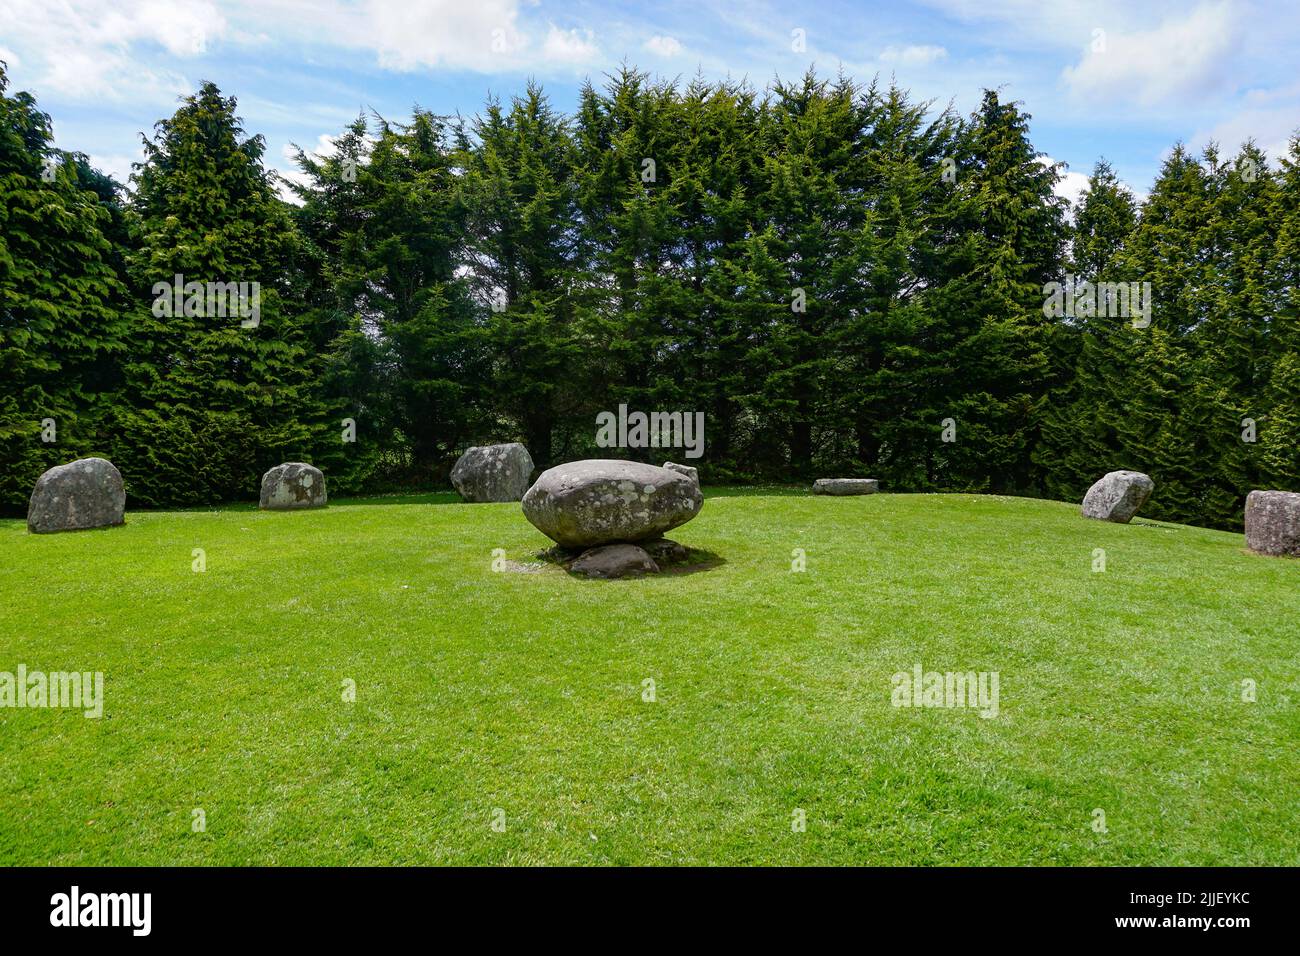 Kenmare, Co. Kerry, Ireland: The Bronze-age Kenmare stone circle is composed of 15 boulders. At the center is a boulder-dolmen with a large capstone. Stock Photo